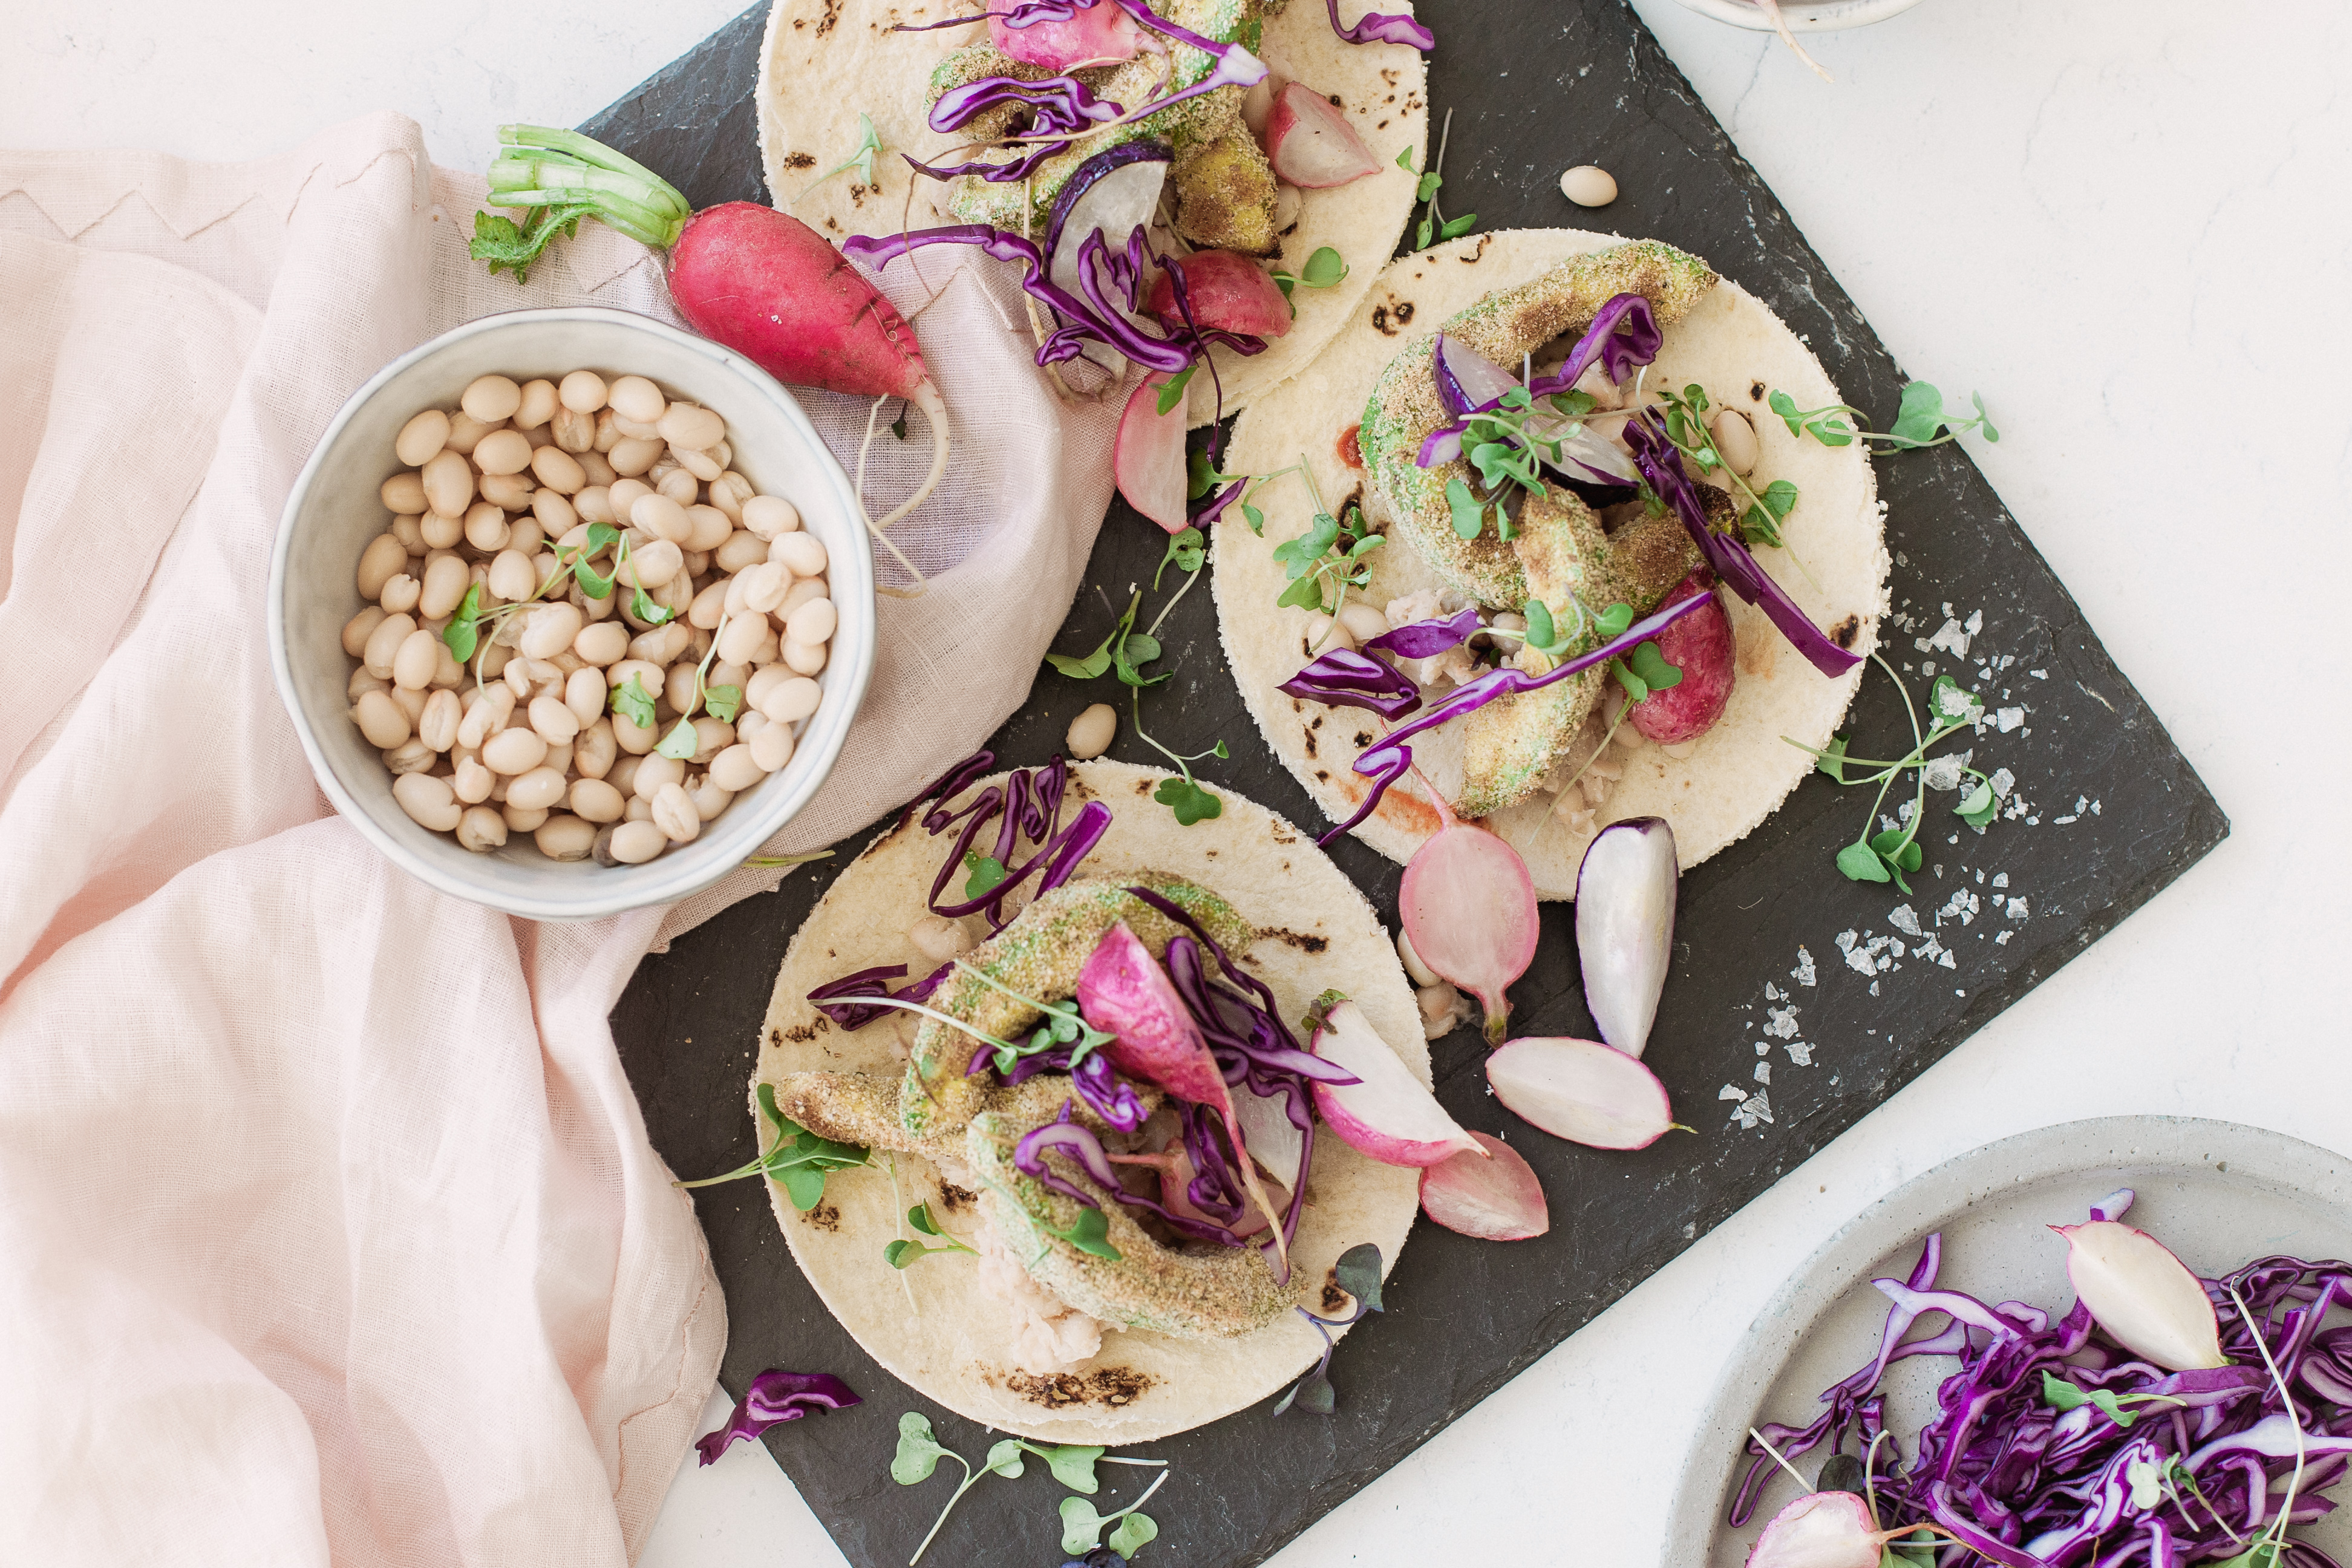 Eat Your Way Thru National Taco Day With These Crispy Avocado​ Tacos